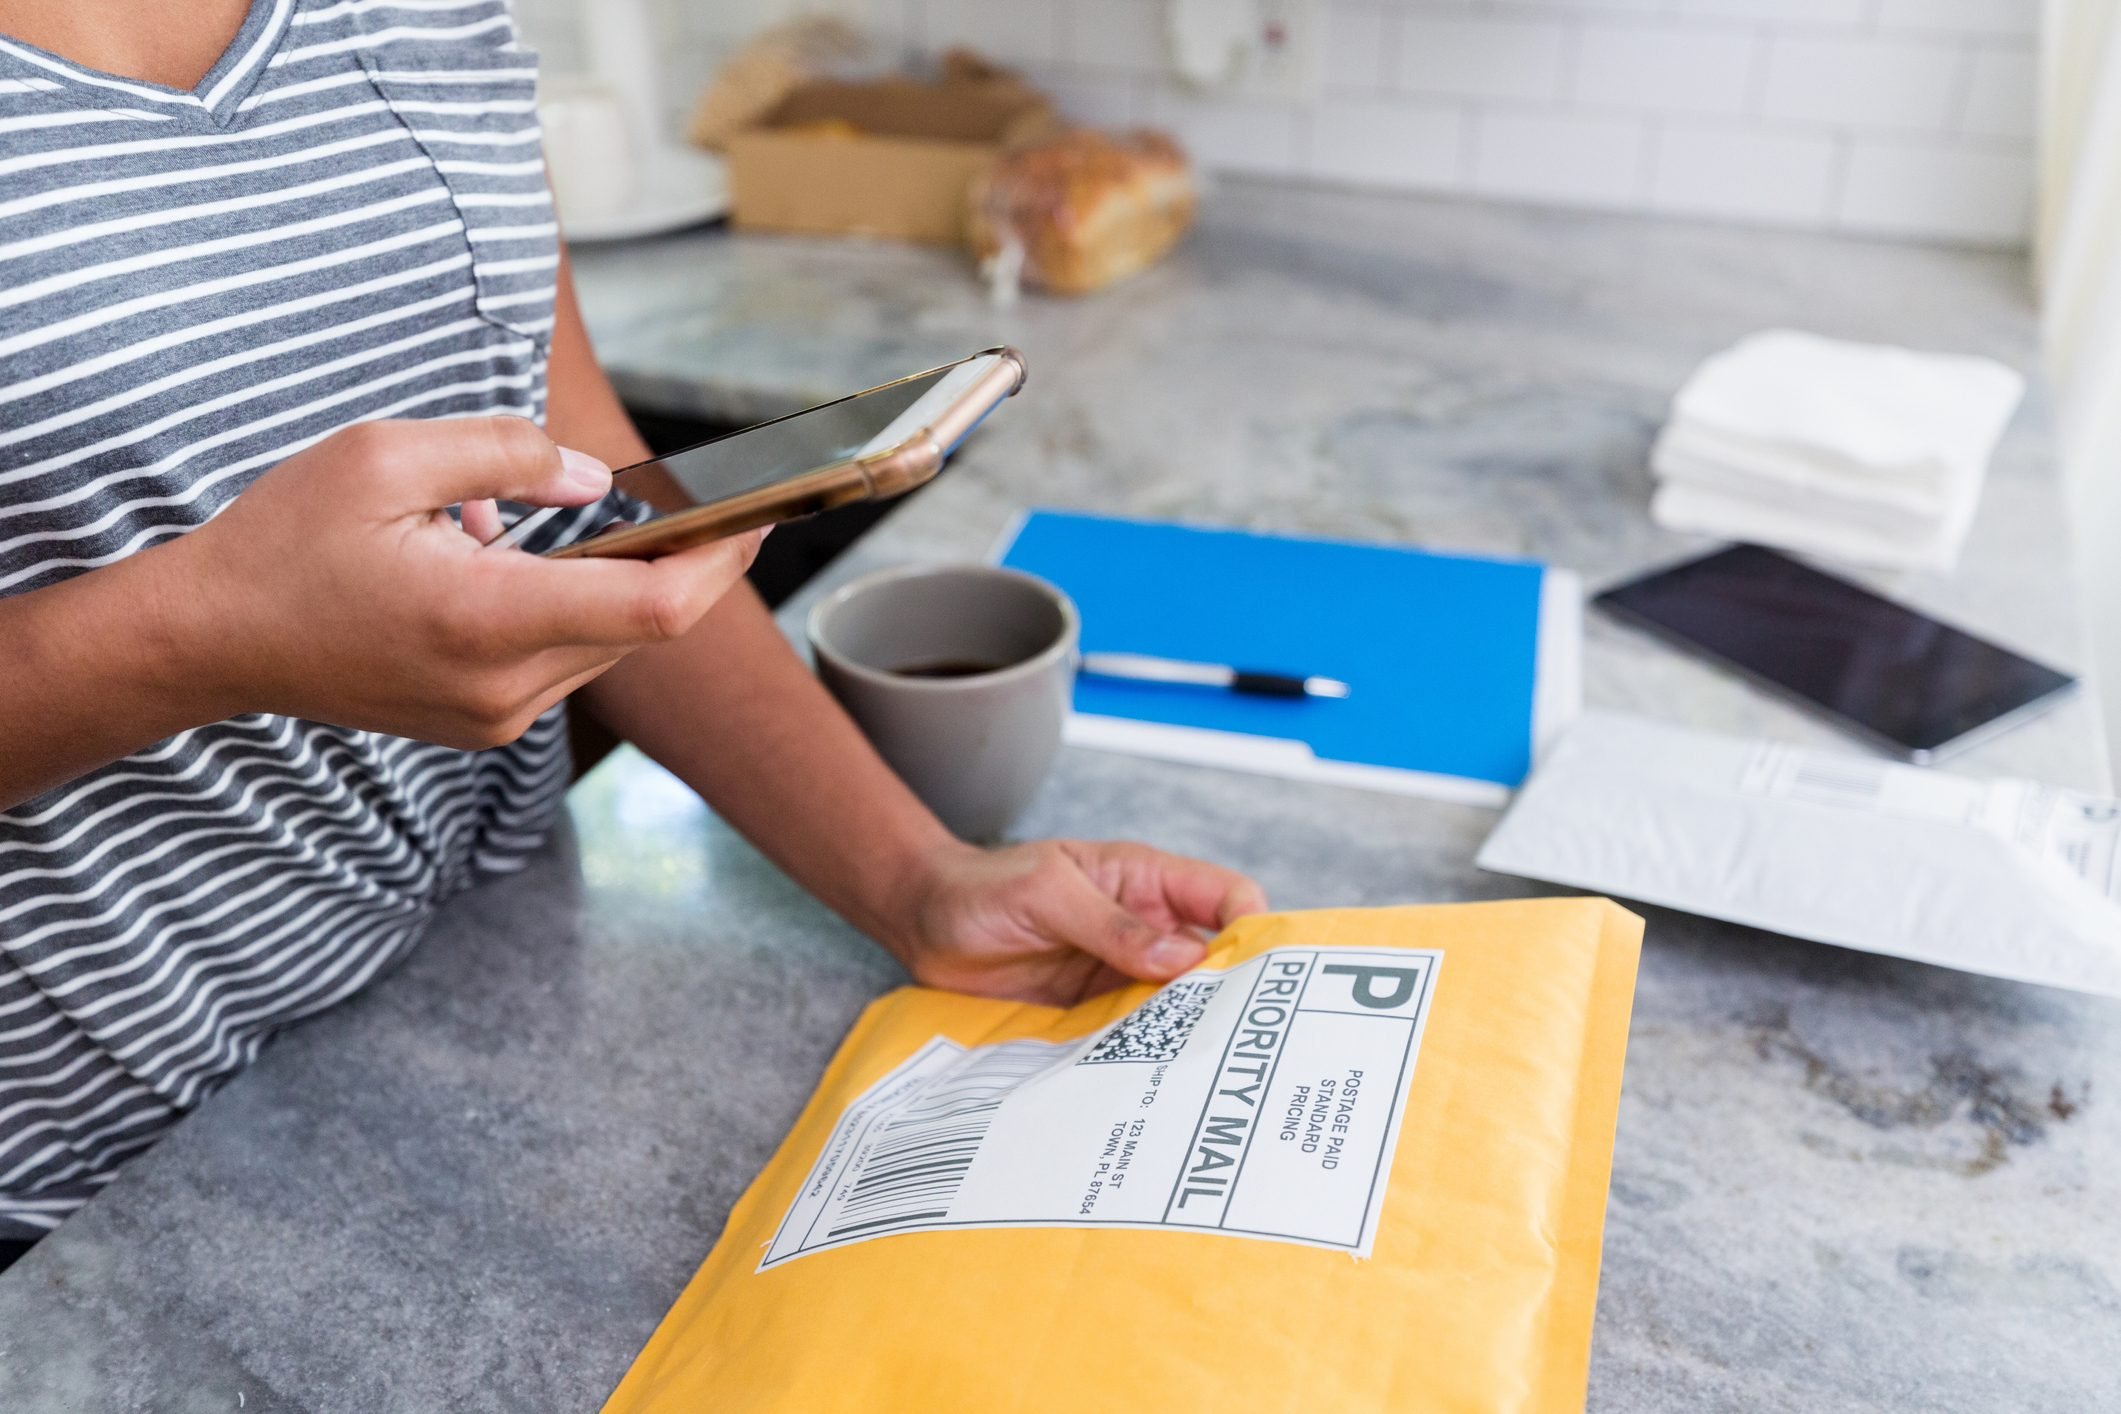 Unrecognizable woman uses mobile app to prep package for mailing